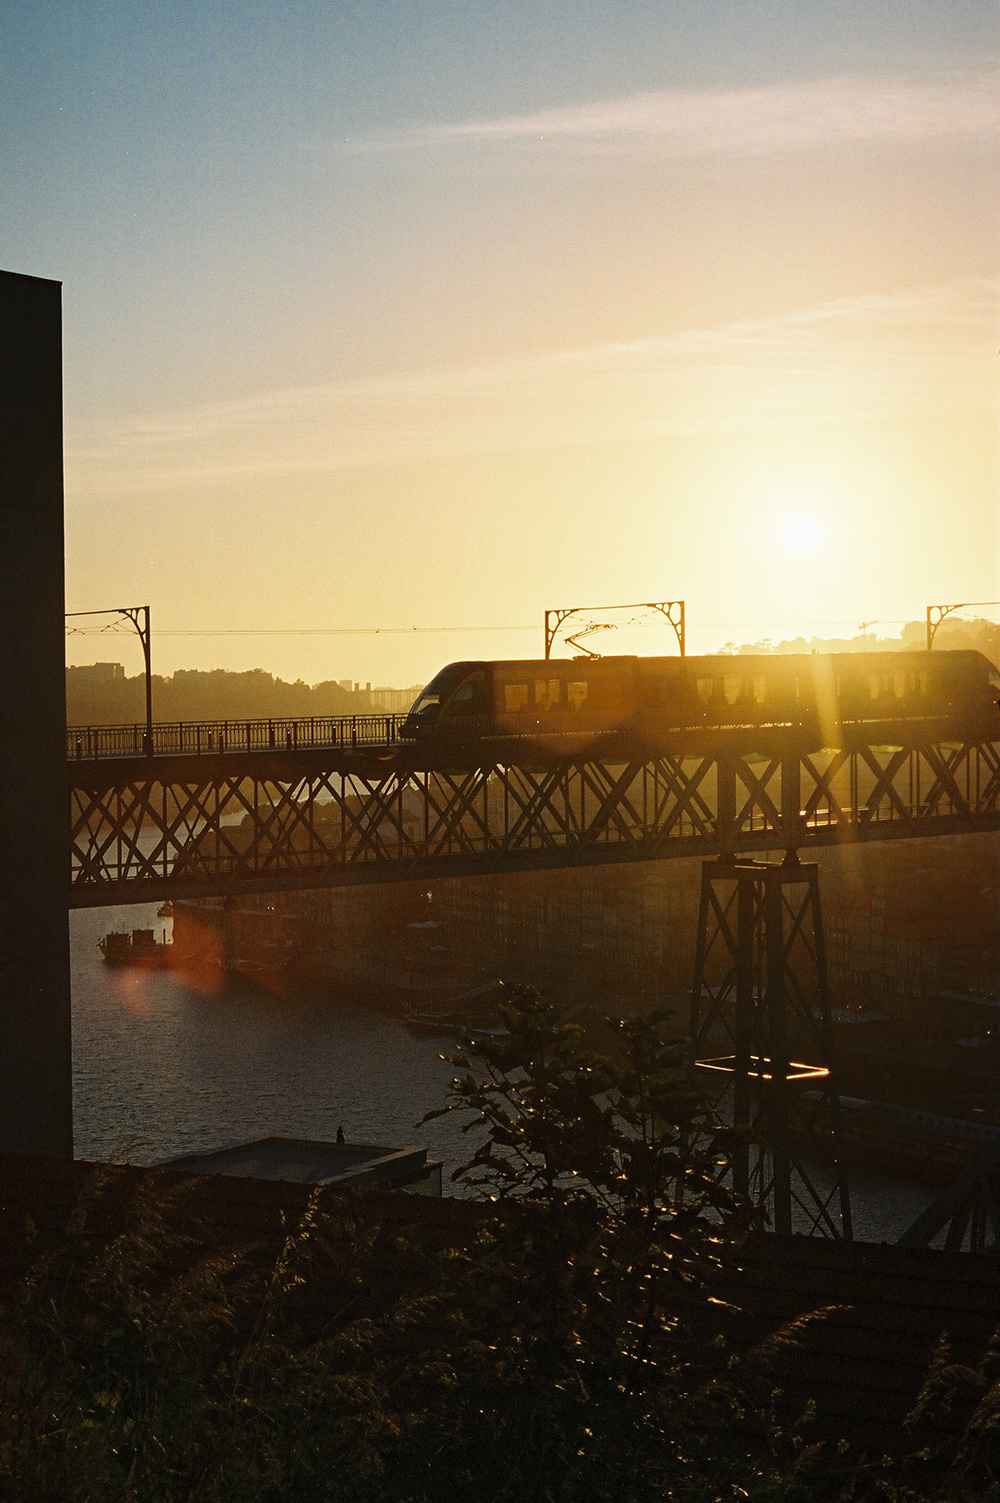 Analog photo of the subway crossing a bridge in Porto while the sun is going down.